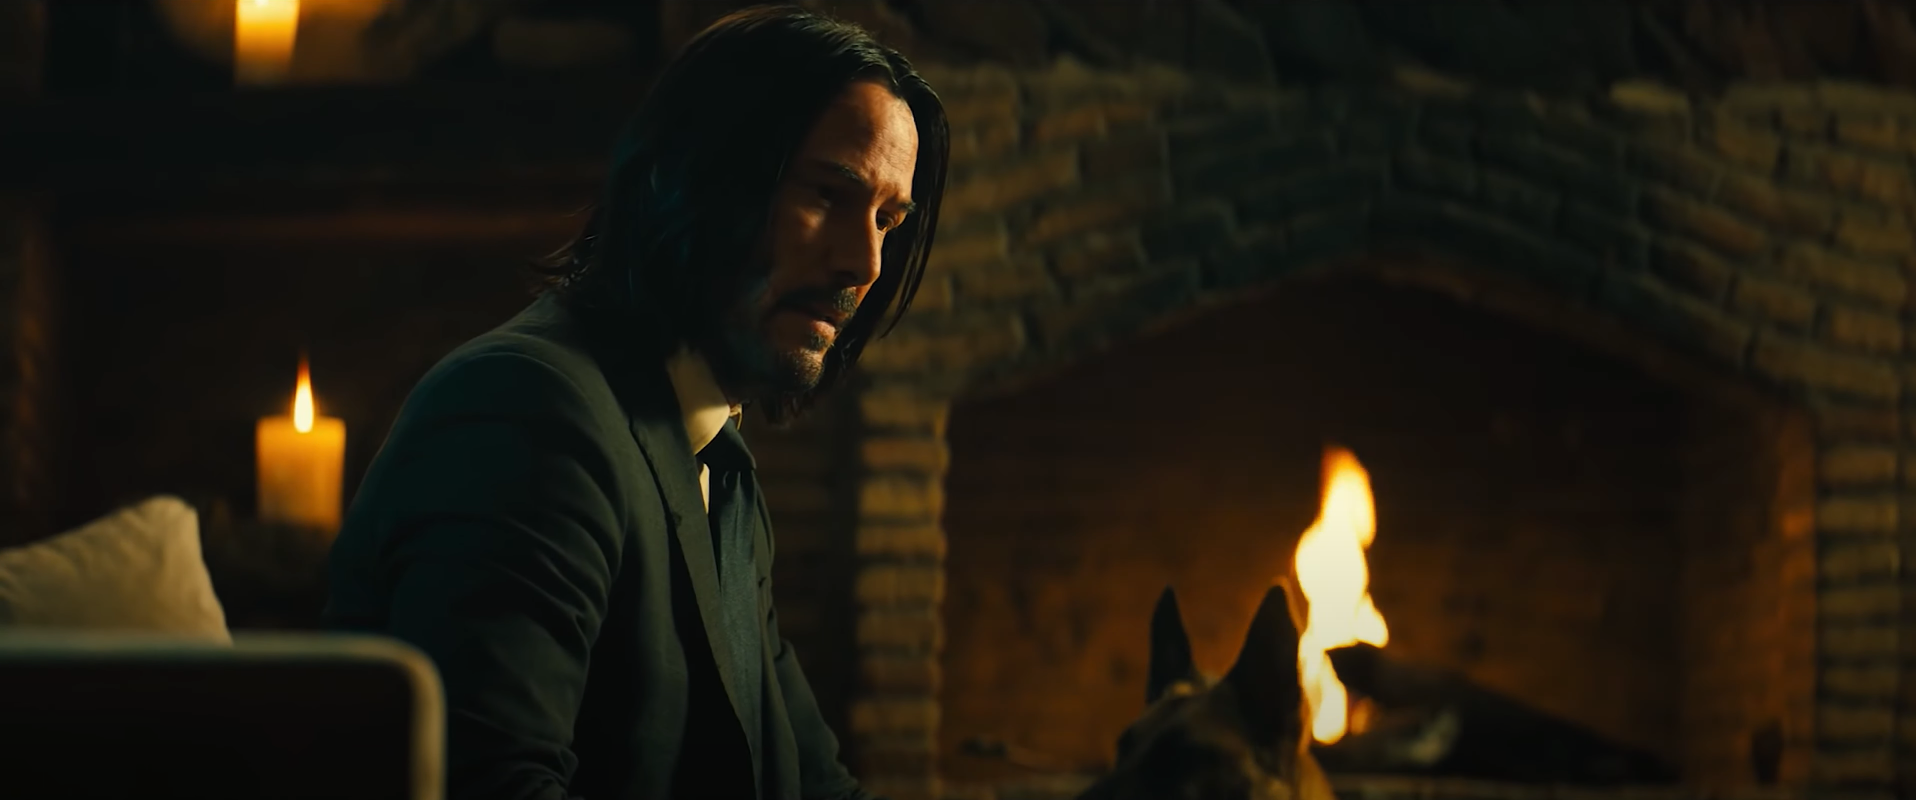 Chinese streaming services refuse to show movies with Keanu Reeves